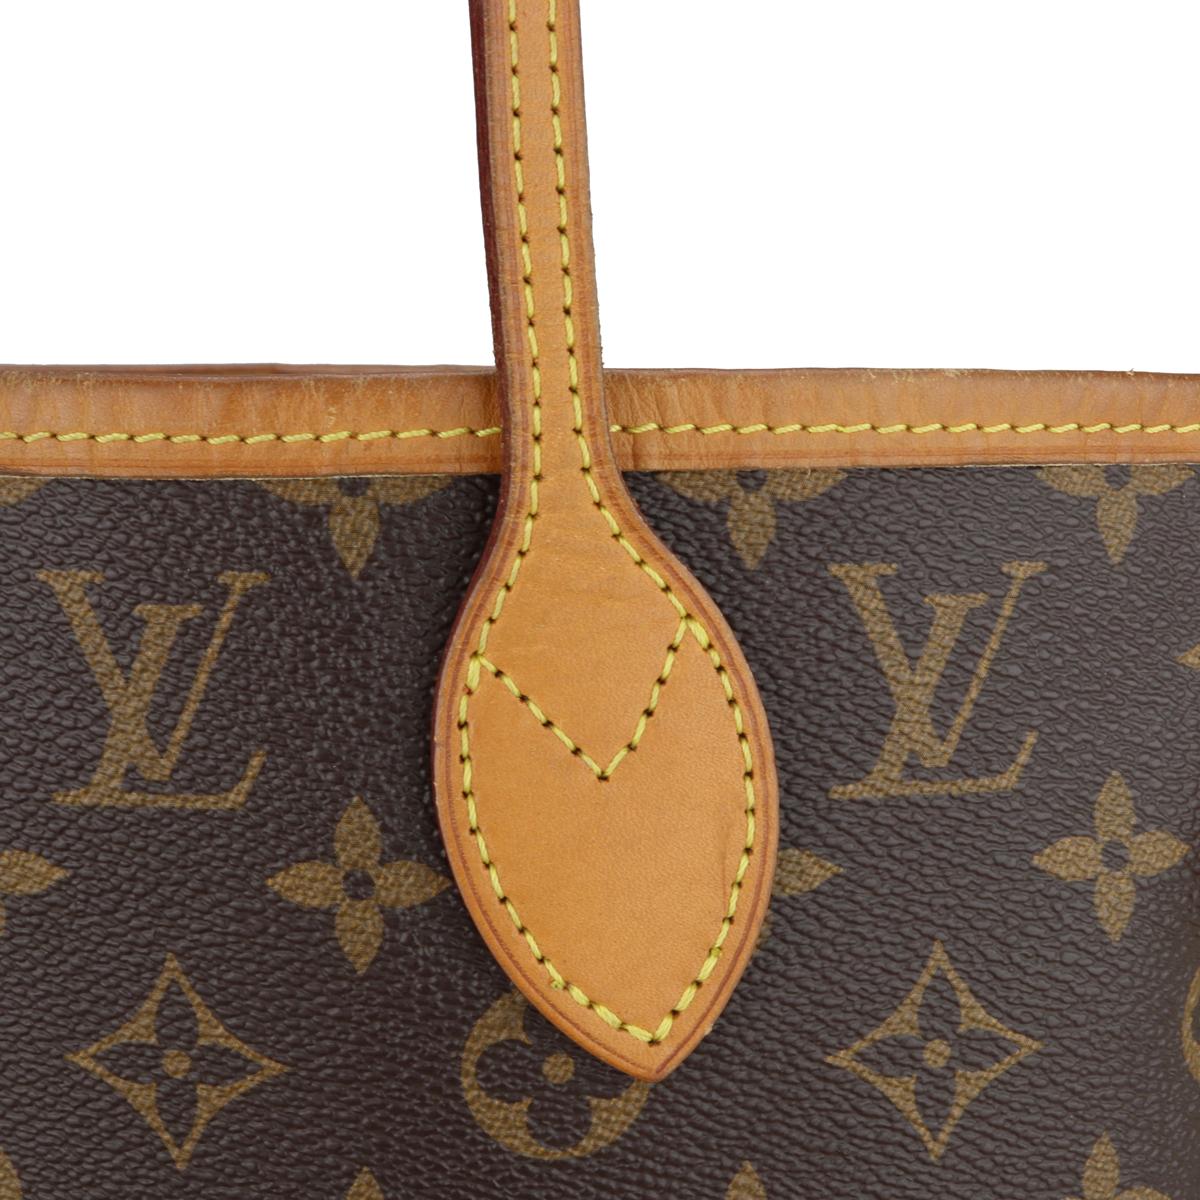 Louis Vuitton Neverfull MM Bag in Monogram with Cherry Red Interior 2019 For Sale 8